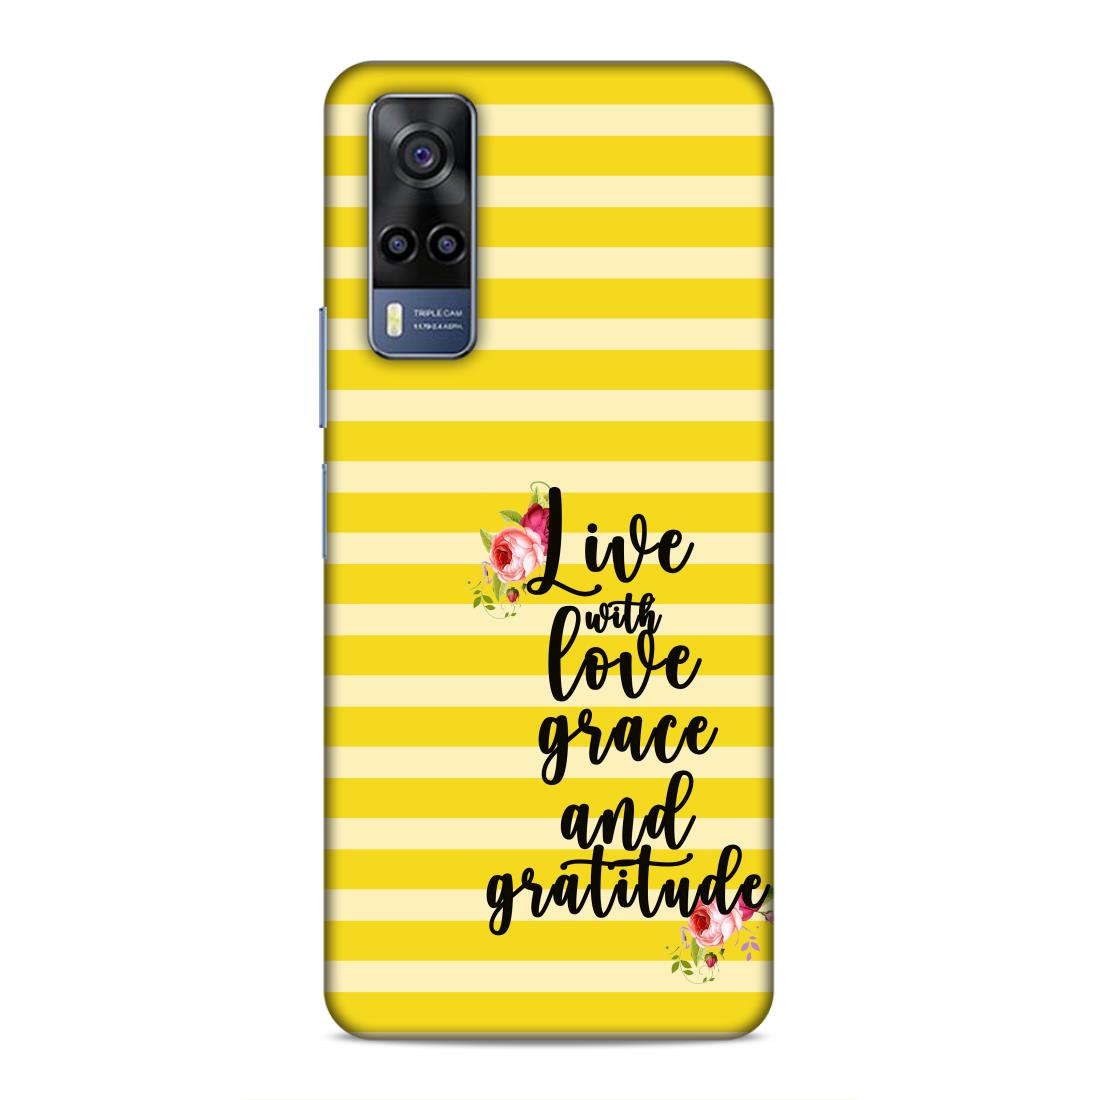 Live with Love Grace and Gratitude Hard Back Case For Vivo iQOO Z3 / Y53s 4G